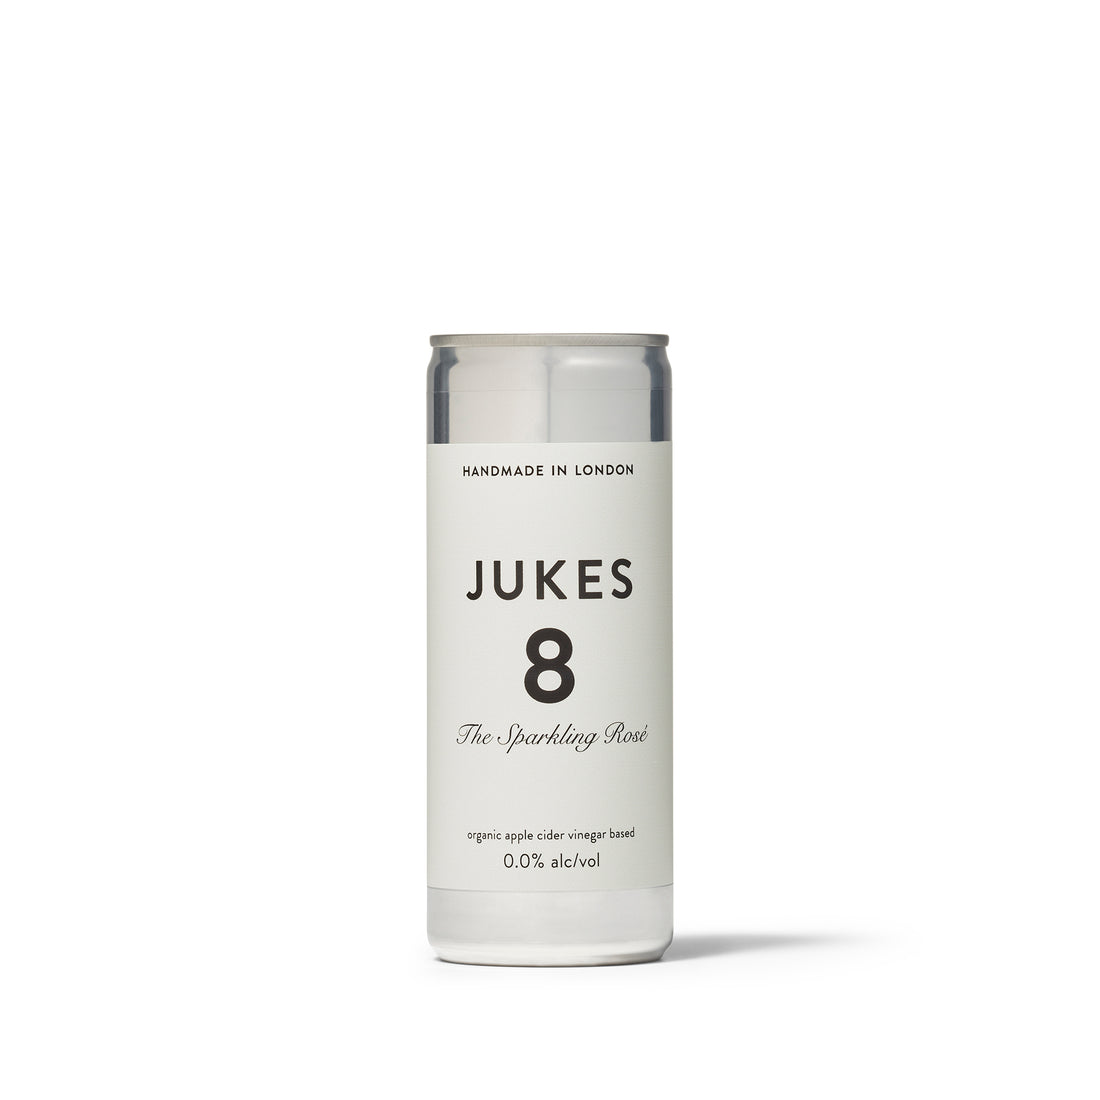 Jukes - 8 - The Sparkling Rosé - Non-Alcoholic Ready-to-Drink 4 Pack - Boisson — Brooklyn's Non-Alcoholic Spirits, Beer, Wine, and Home Bar Shop in Cobble Hill